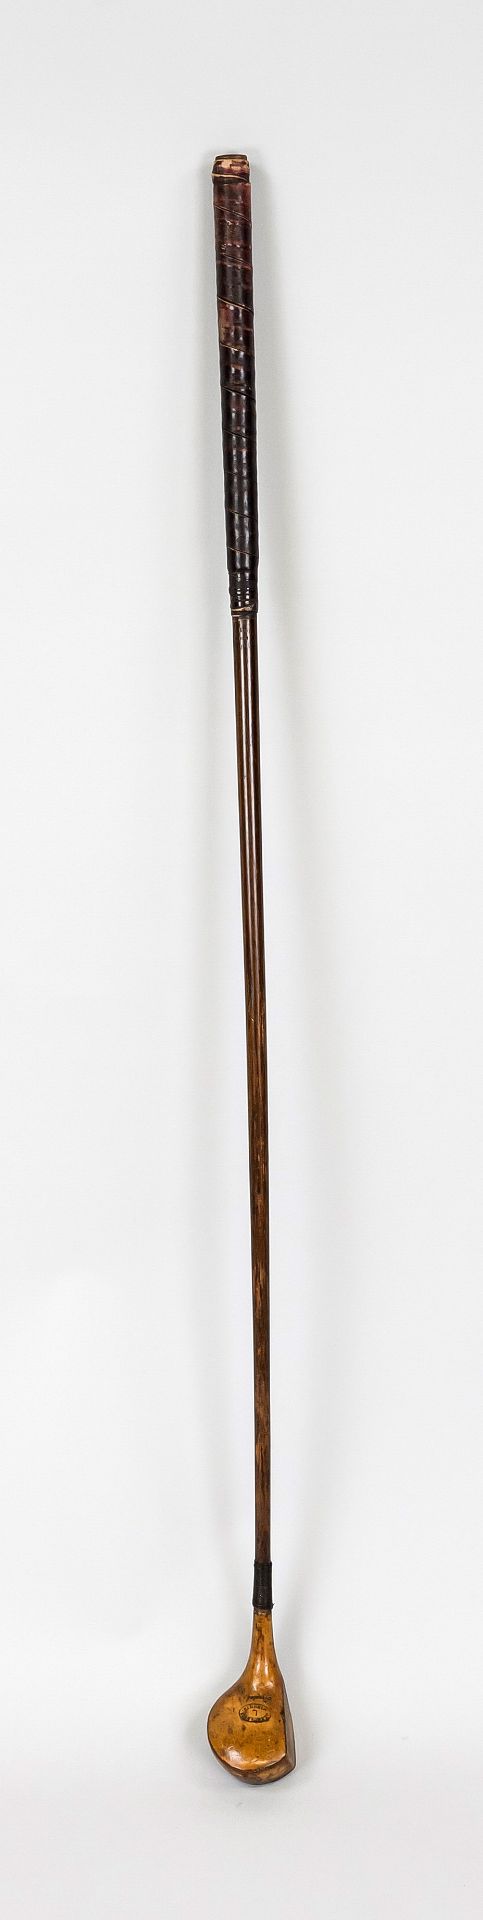 Historic golf club, Scotland late 19th century, wood, metal, leather. Signed/inscribed as a